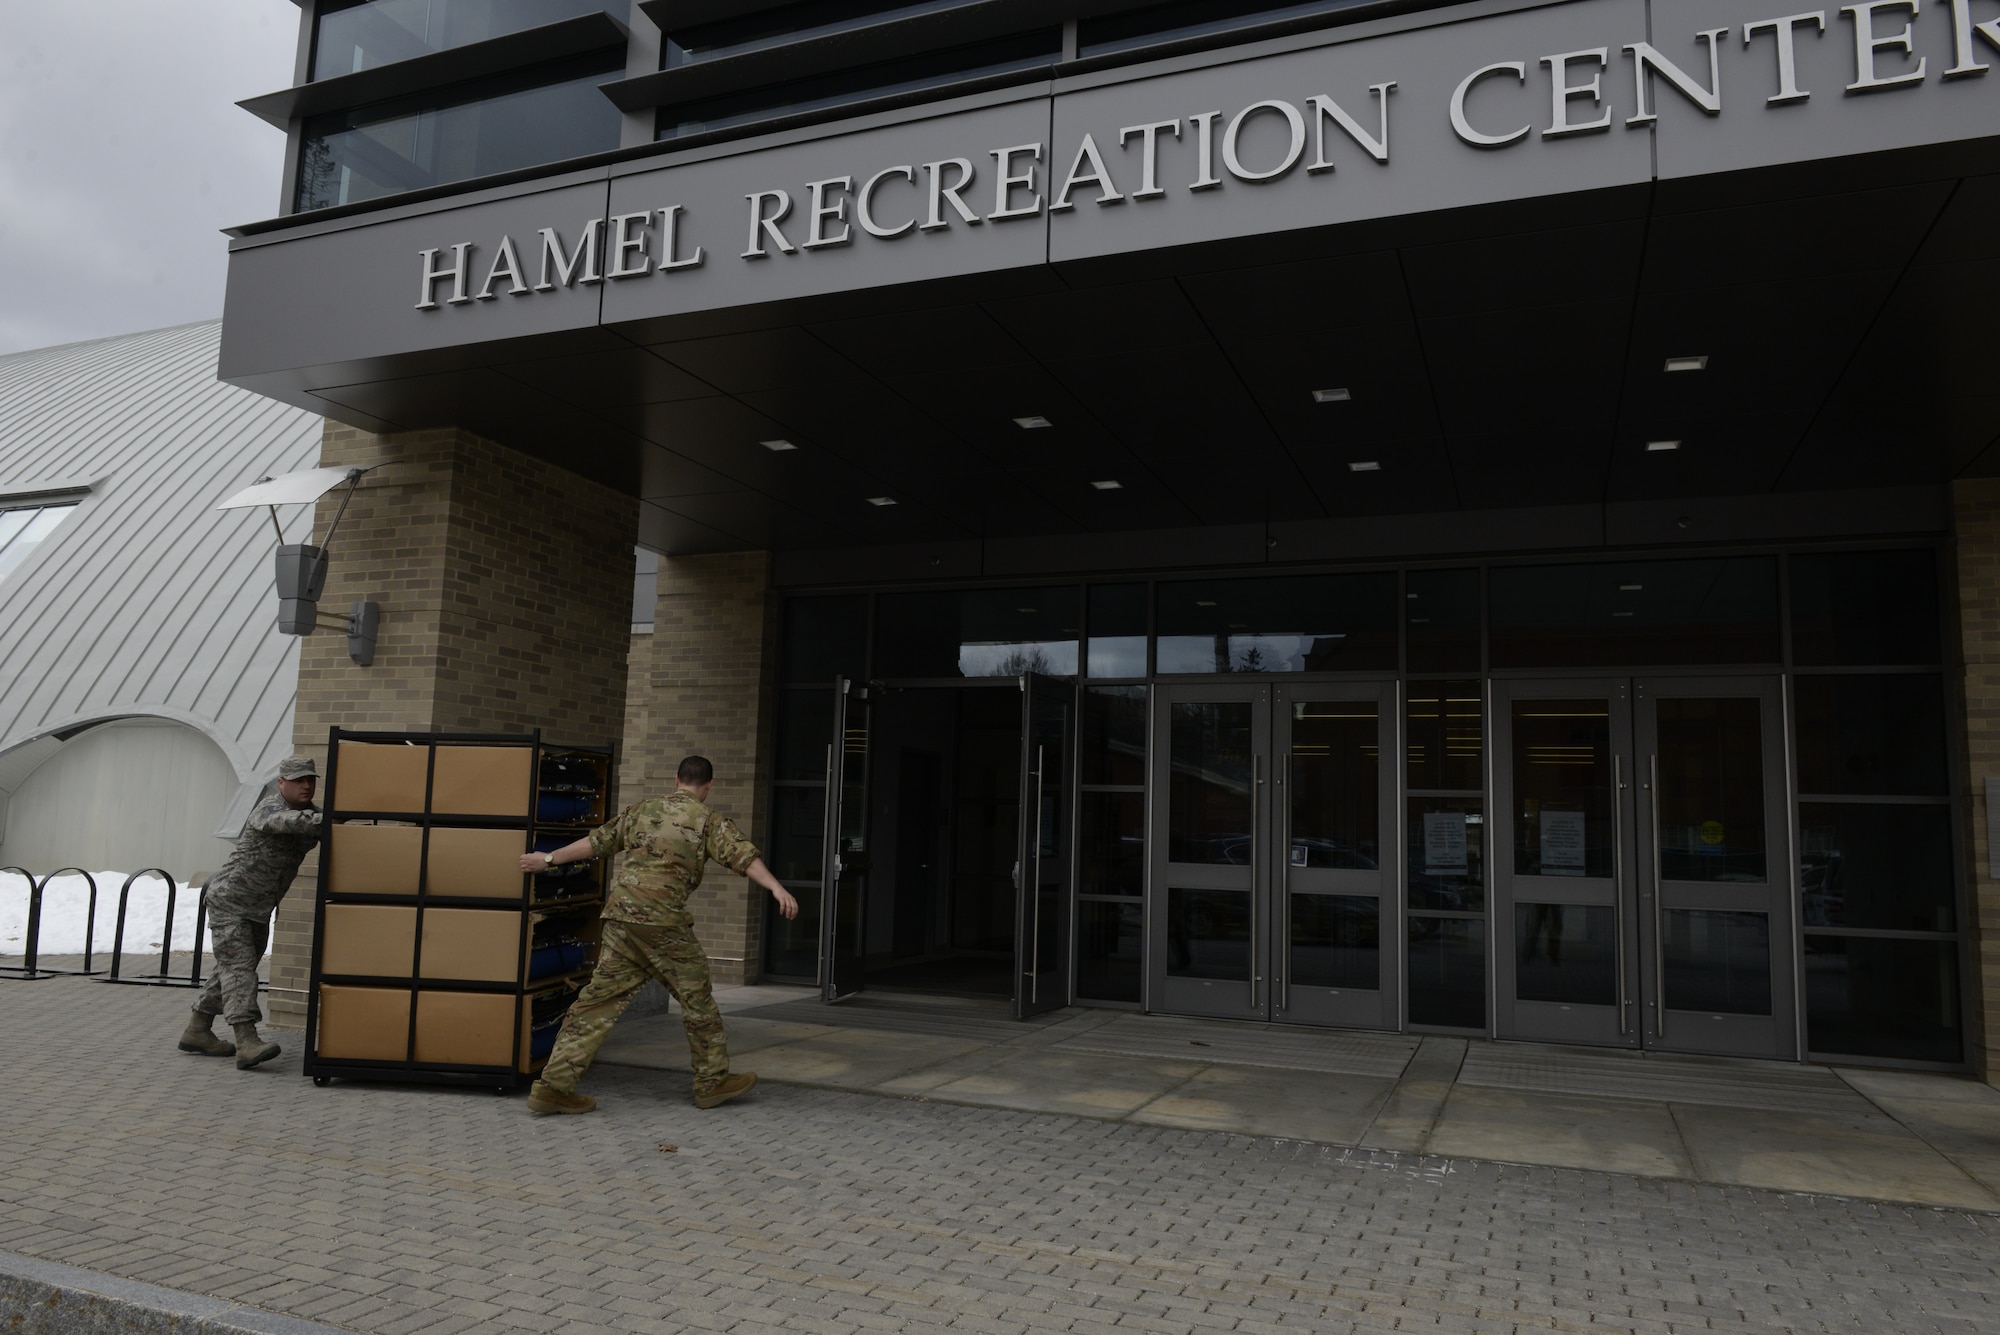 Tech. Sgt. Lance Whitehill, 157th Civil Engineers Squadron, and Capt. Jacob Ricciotti, 157th Operations Group, New Hampshire Air National Guard, bring medical supplies into the Hamel Recreation Center at the University of New Hampshire, March 25, 2020. The facility will augment area hospitals treating COVID-19 cases, if necessary. It is one of nine the NHNG plans to set up and manage across the state. (U.S. Air National Guard photo by Tech. Sgt. Aaron Vezeau)